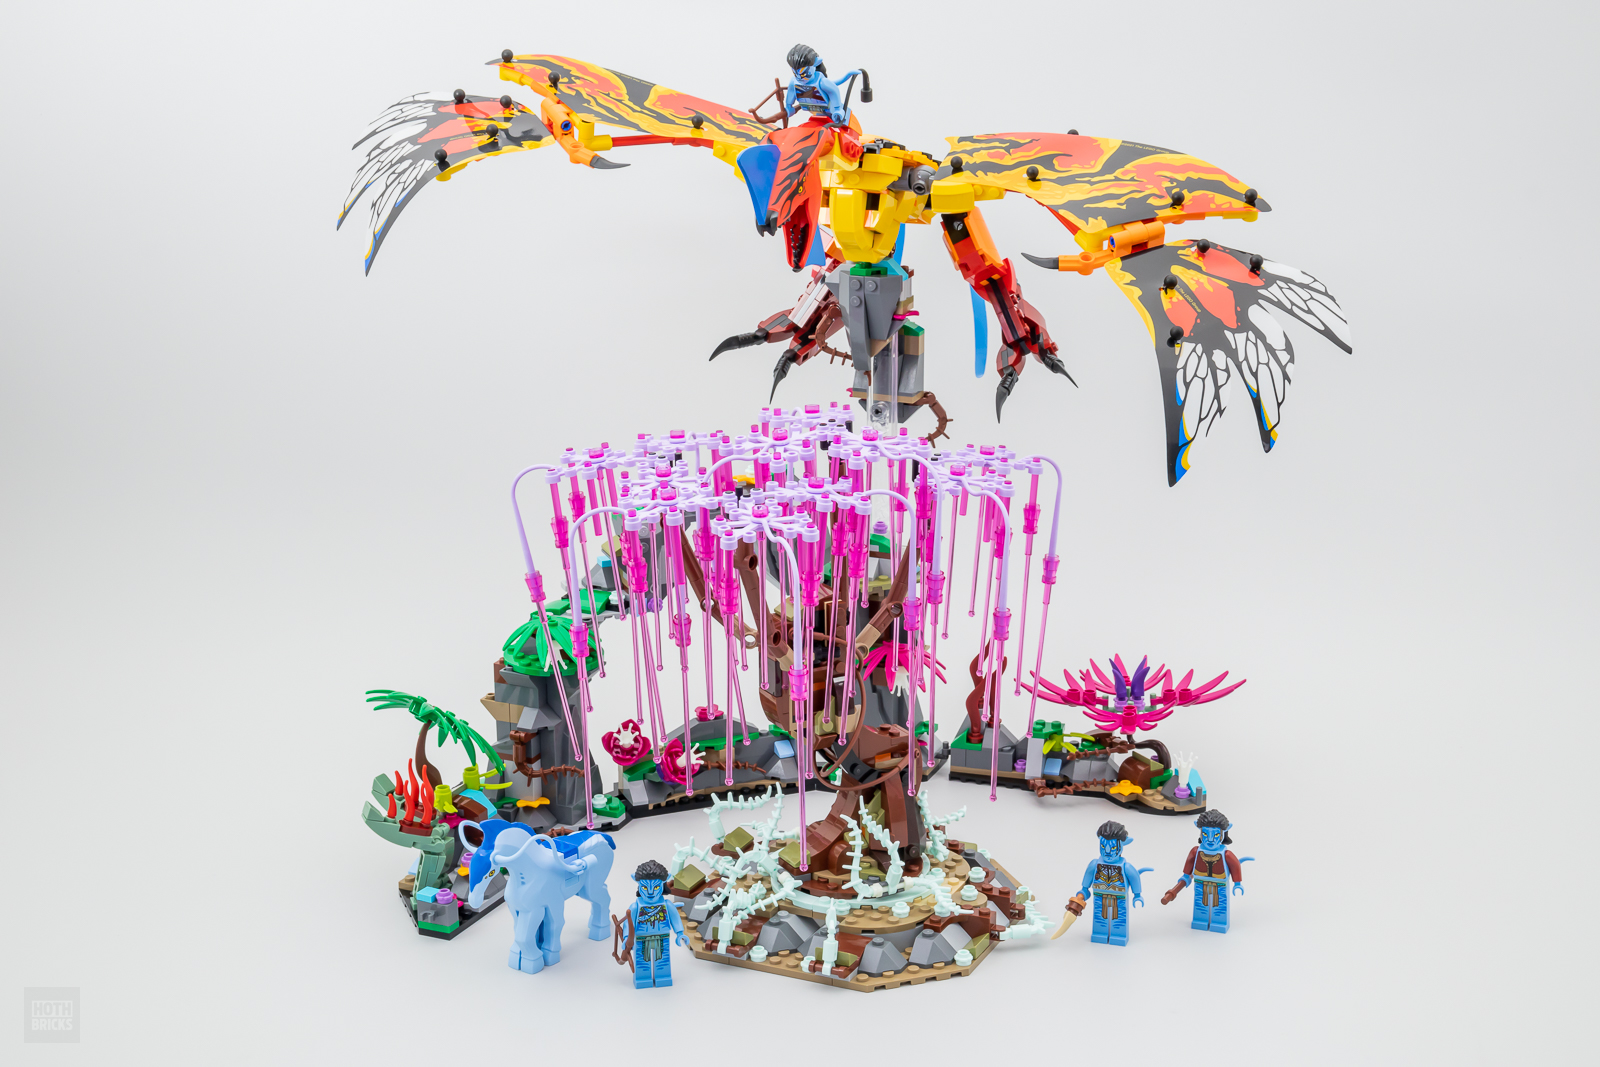 What would LEGO Avatar look like with brick-built wings?